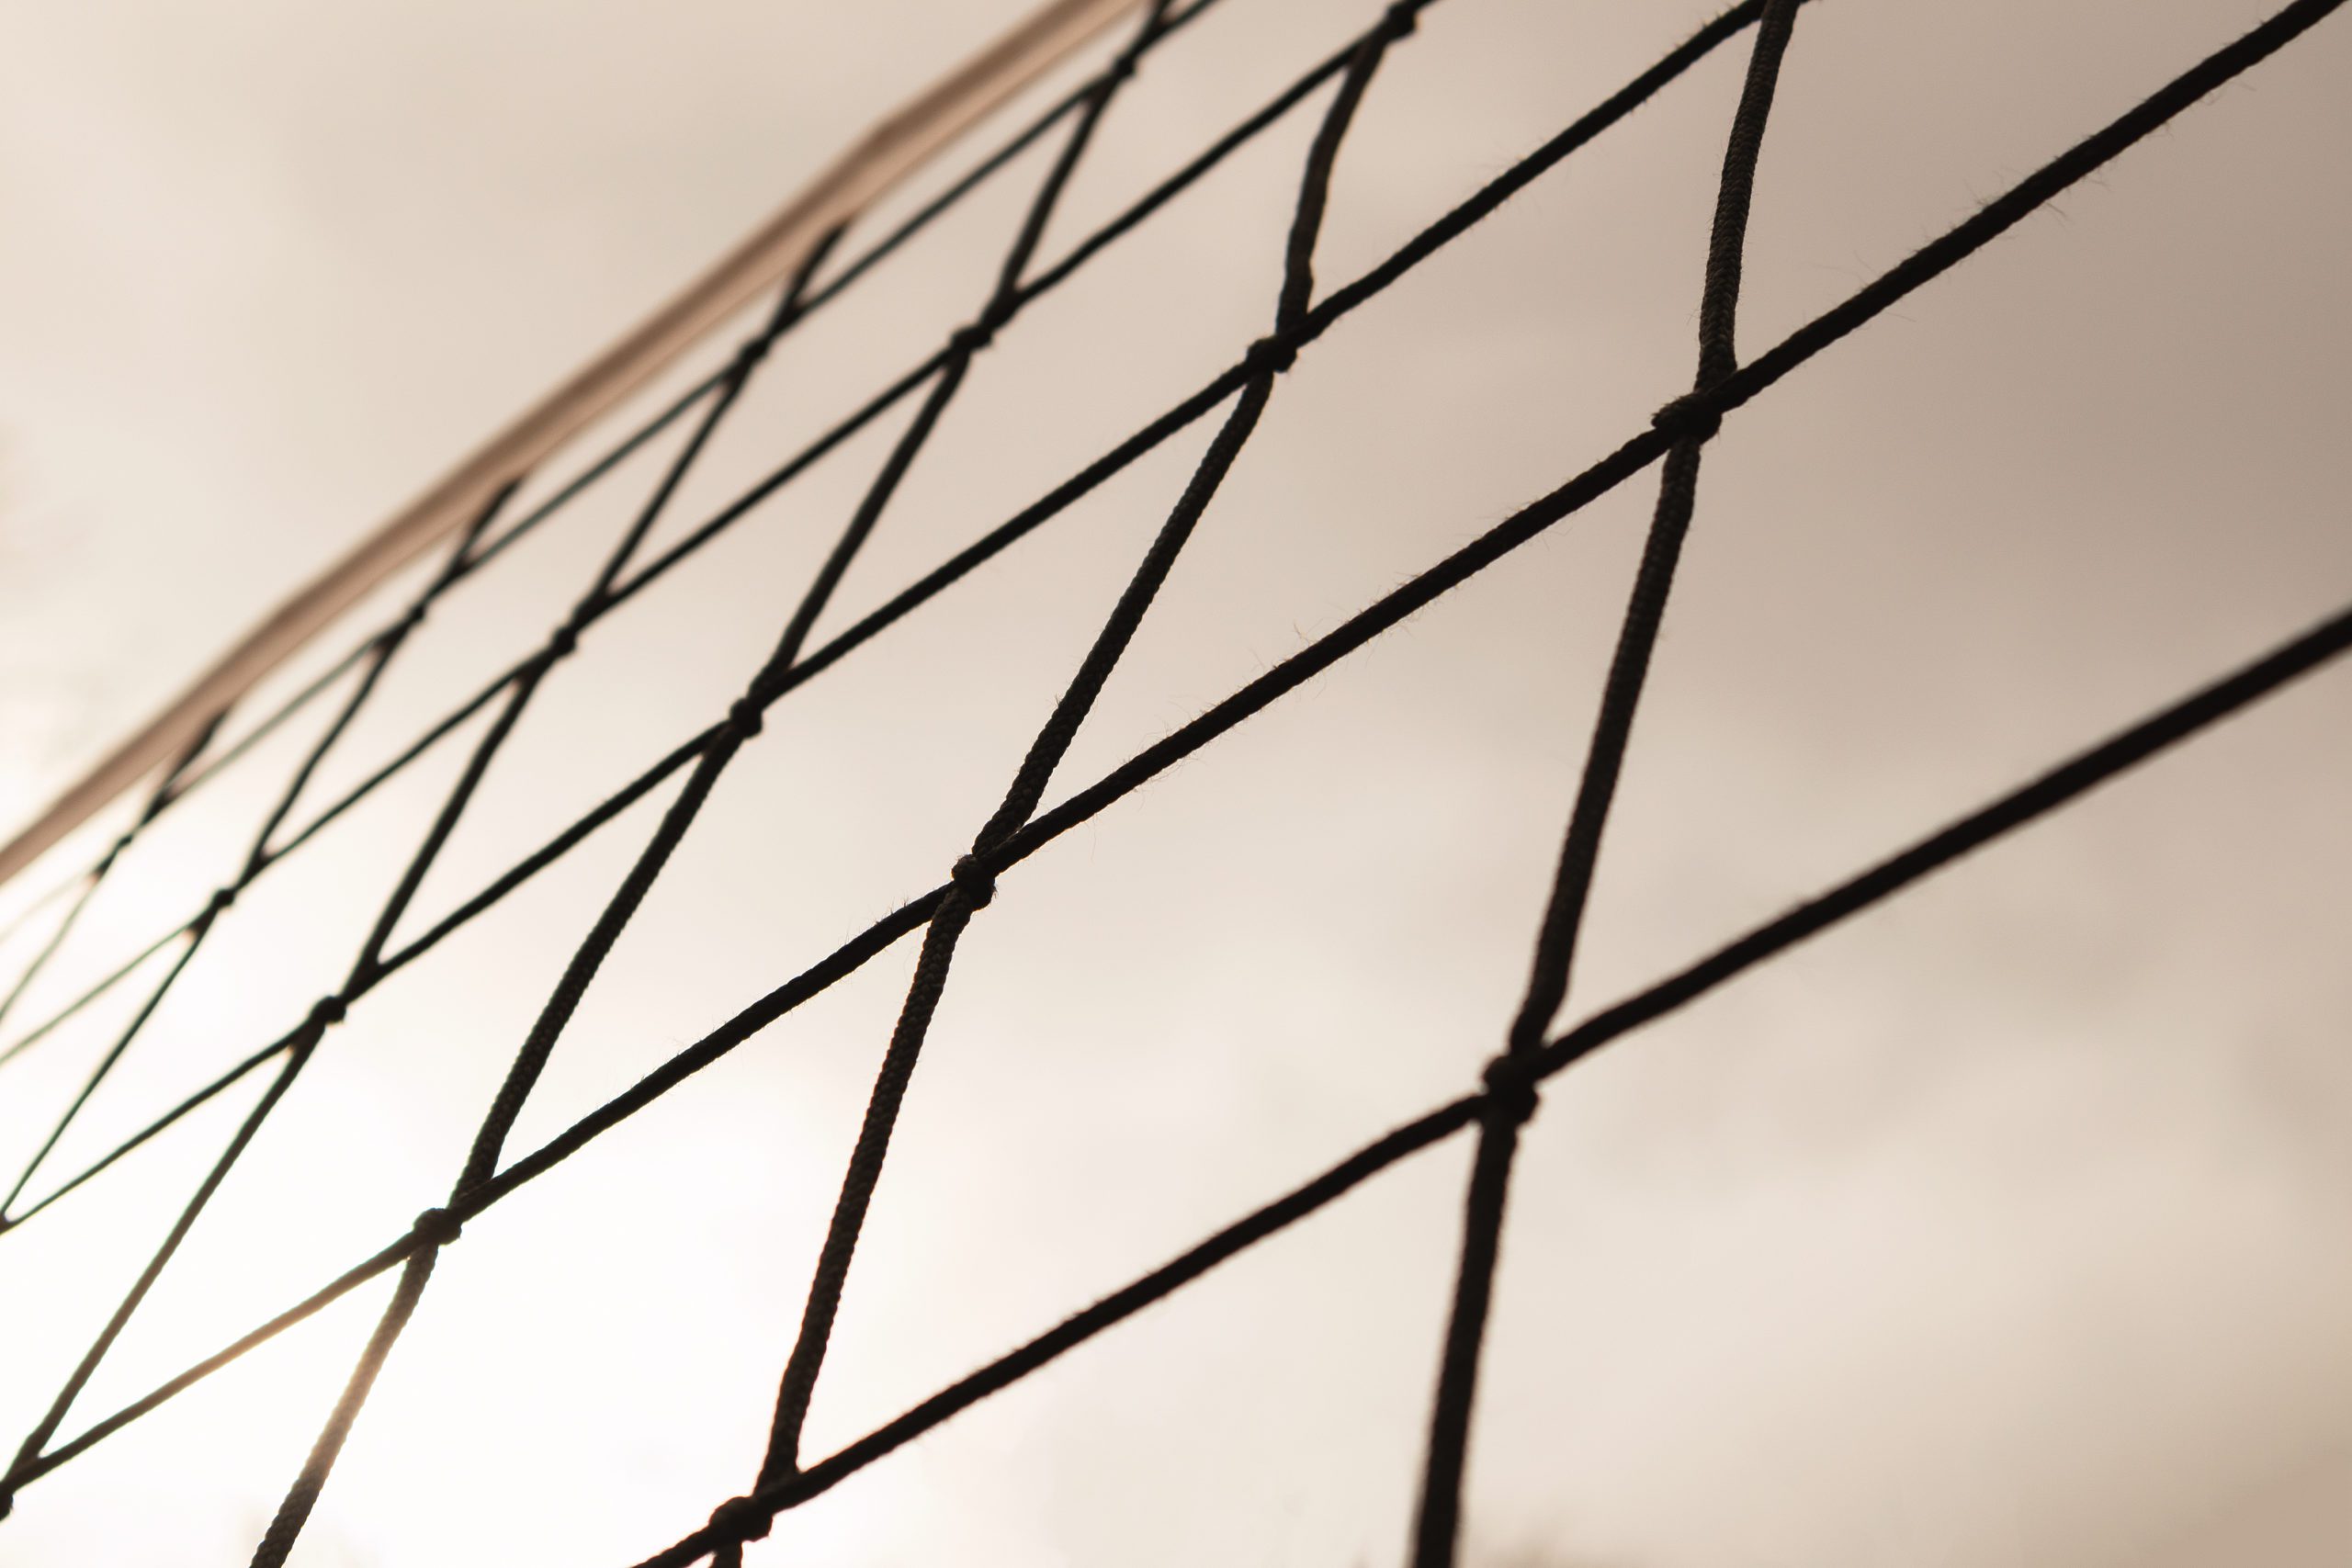 Details of net from tennis or volleyball courtyard.